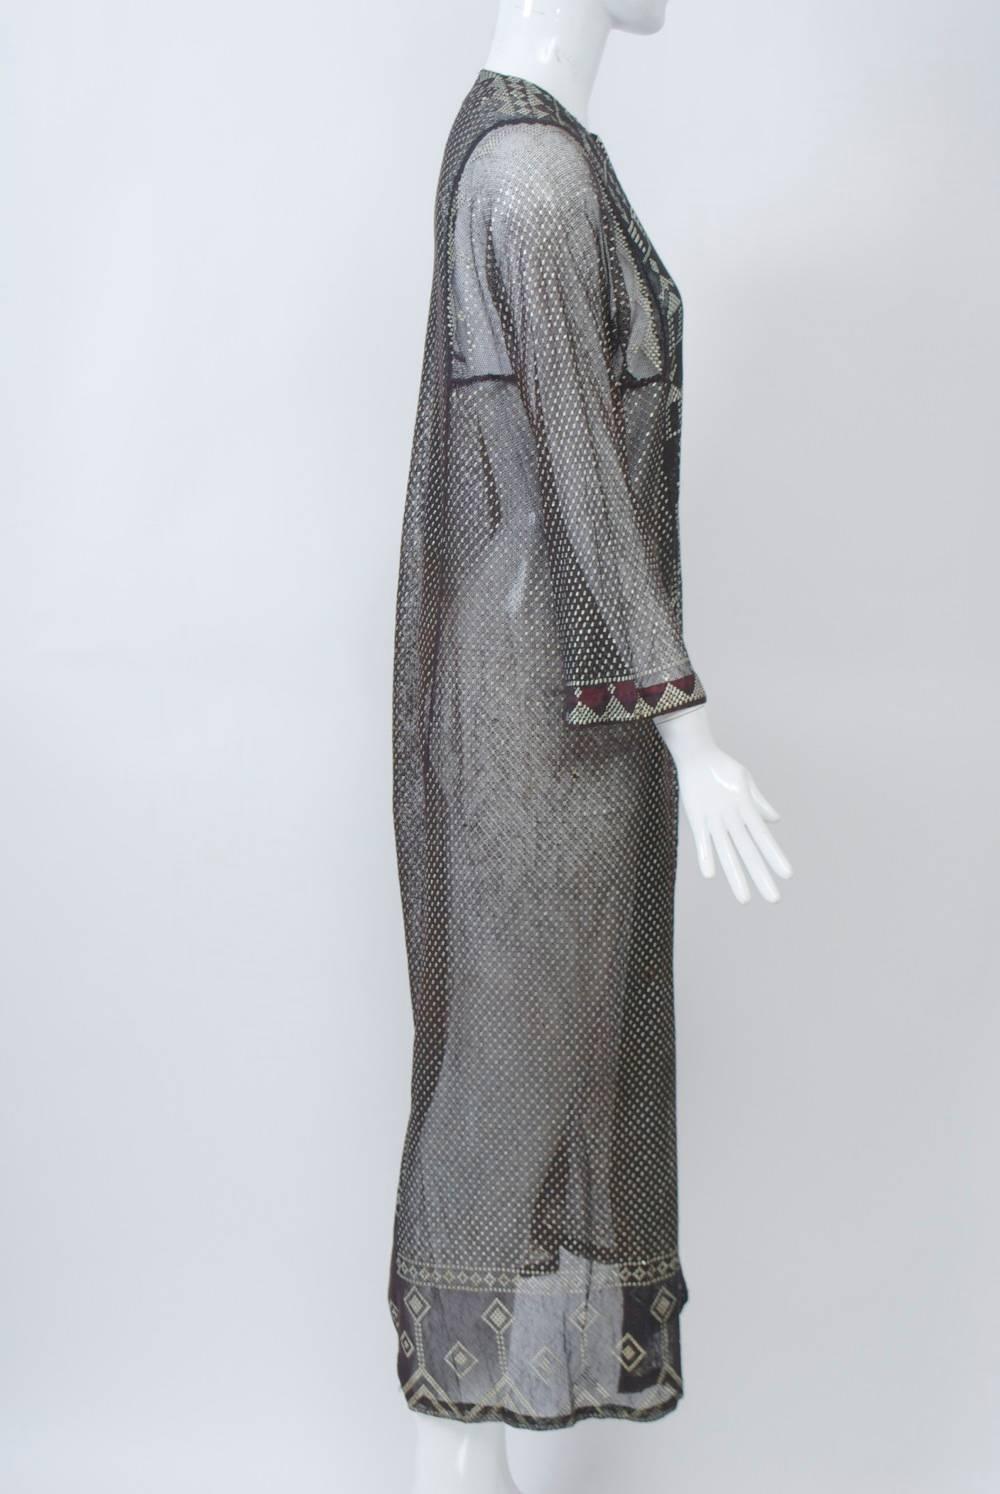 Caftan-style dress in black Assuit fabric, mesh woven with silver metal, that originated in Egypt and popularized after the Egyptomania following the opening of King Tut's tomb in 1922. Simple woven pattern throughout punctuated by geometric motifs